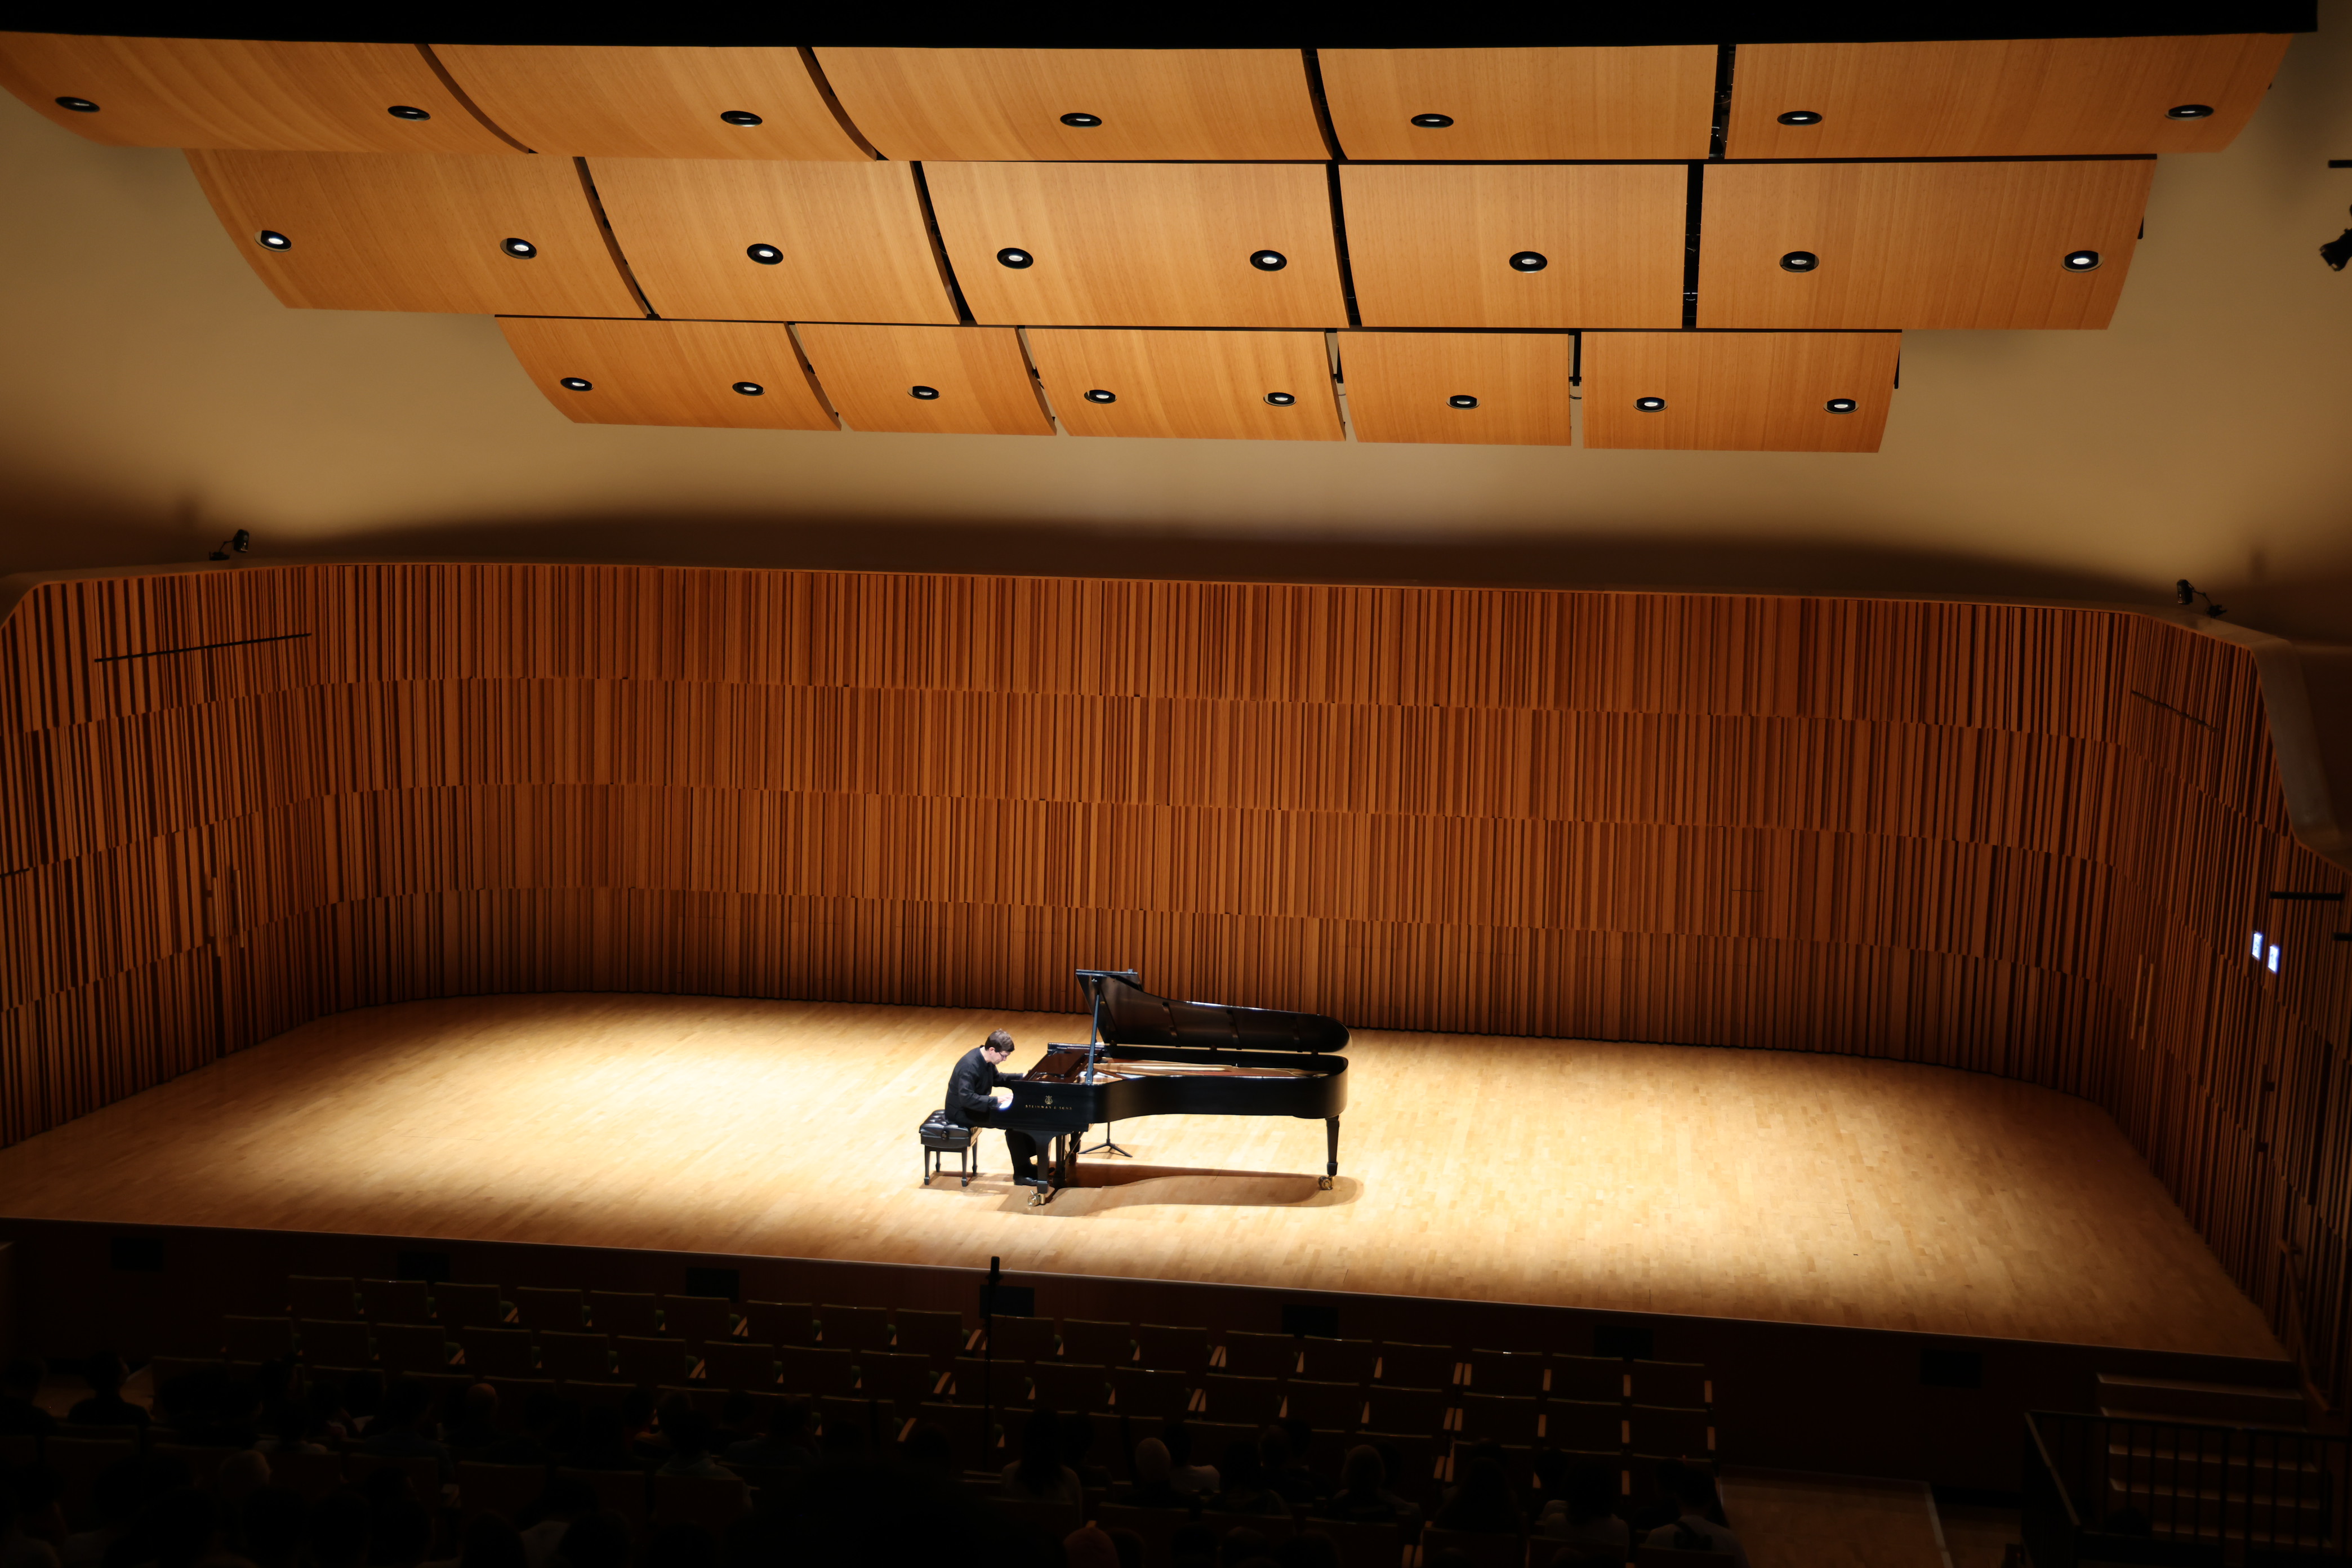 Piano Recital with Paavali Jumppanen